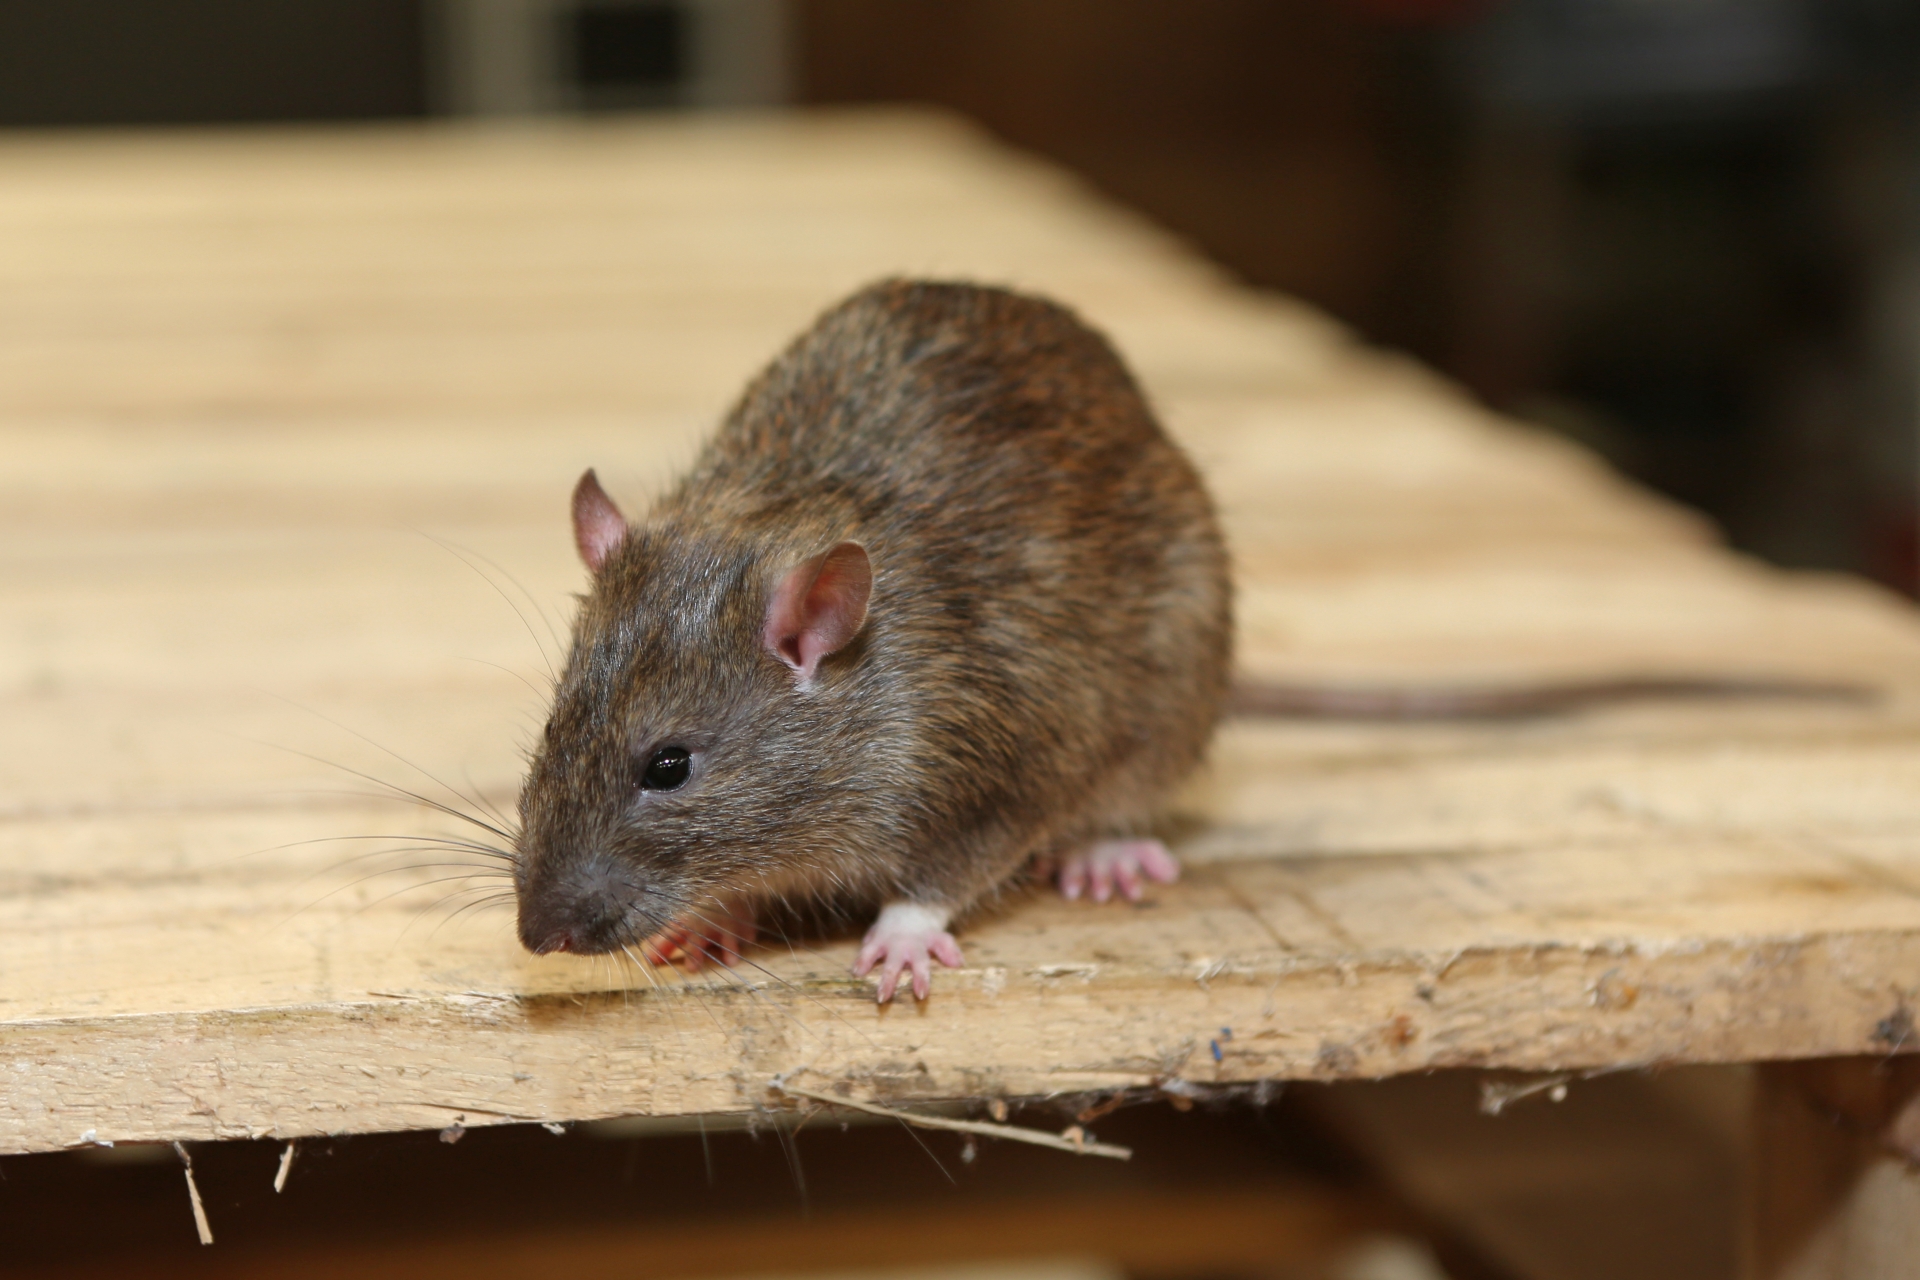 Rat Control, Pest Control in Hither Green, SE13. Call Now 020 8166 9746